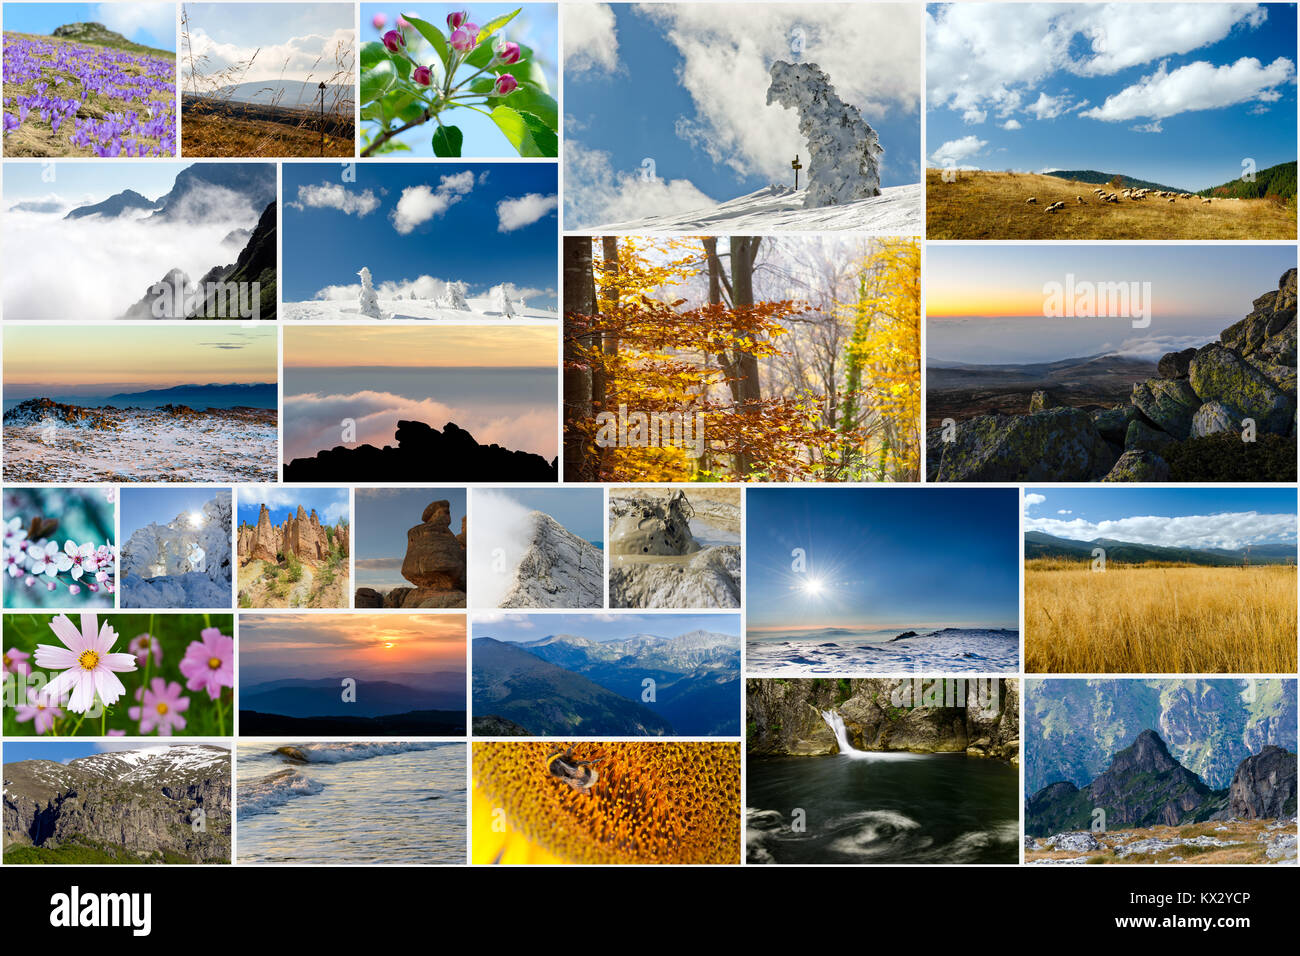 Collage of various nature photos in different seasons Stock Photo